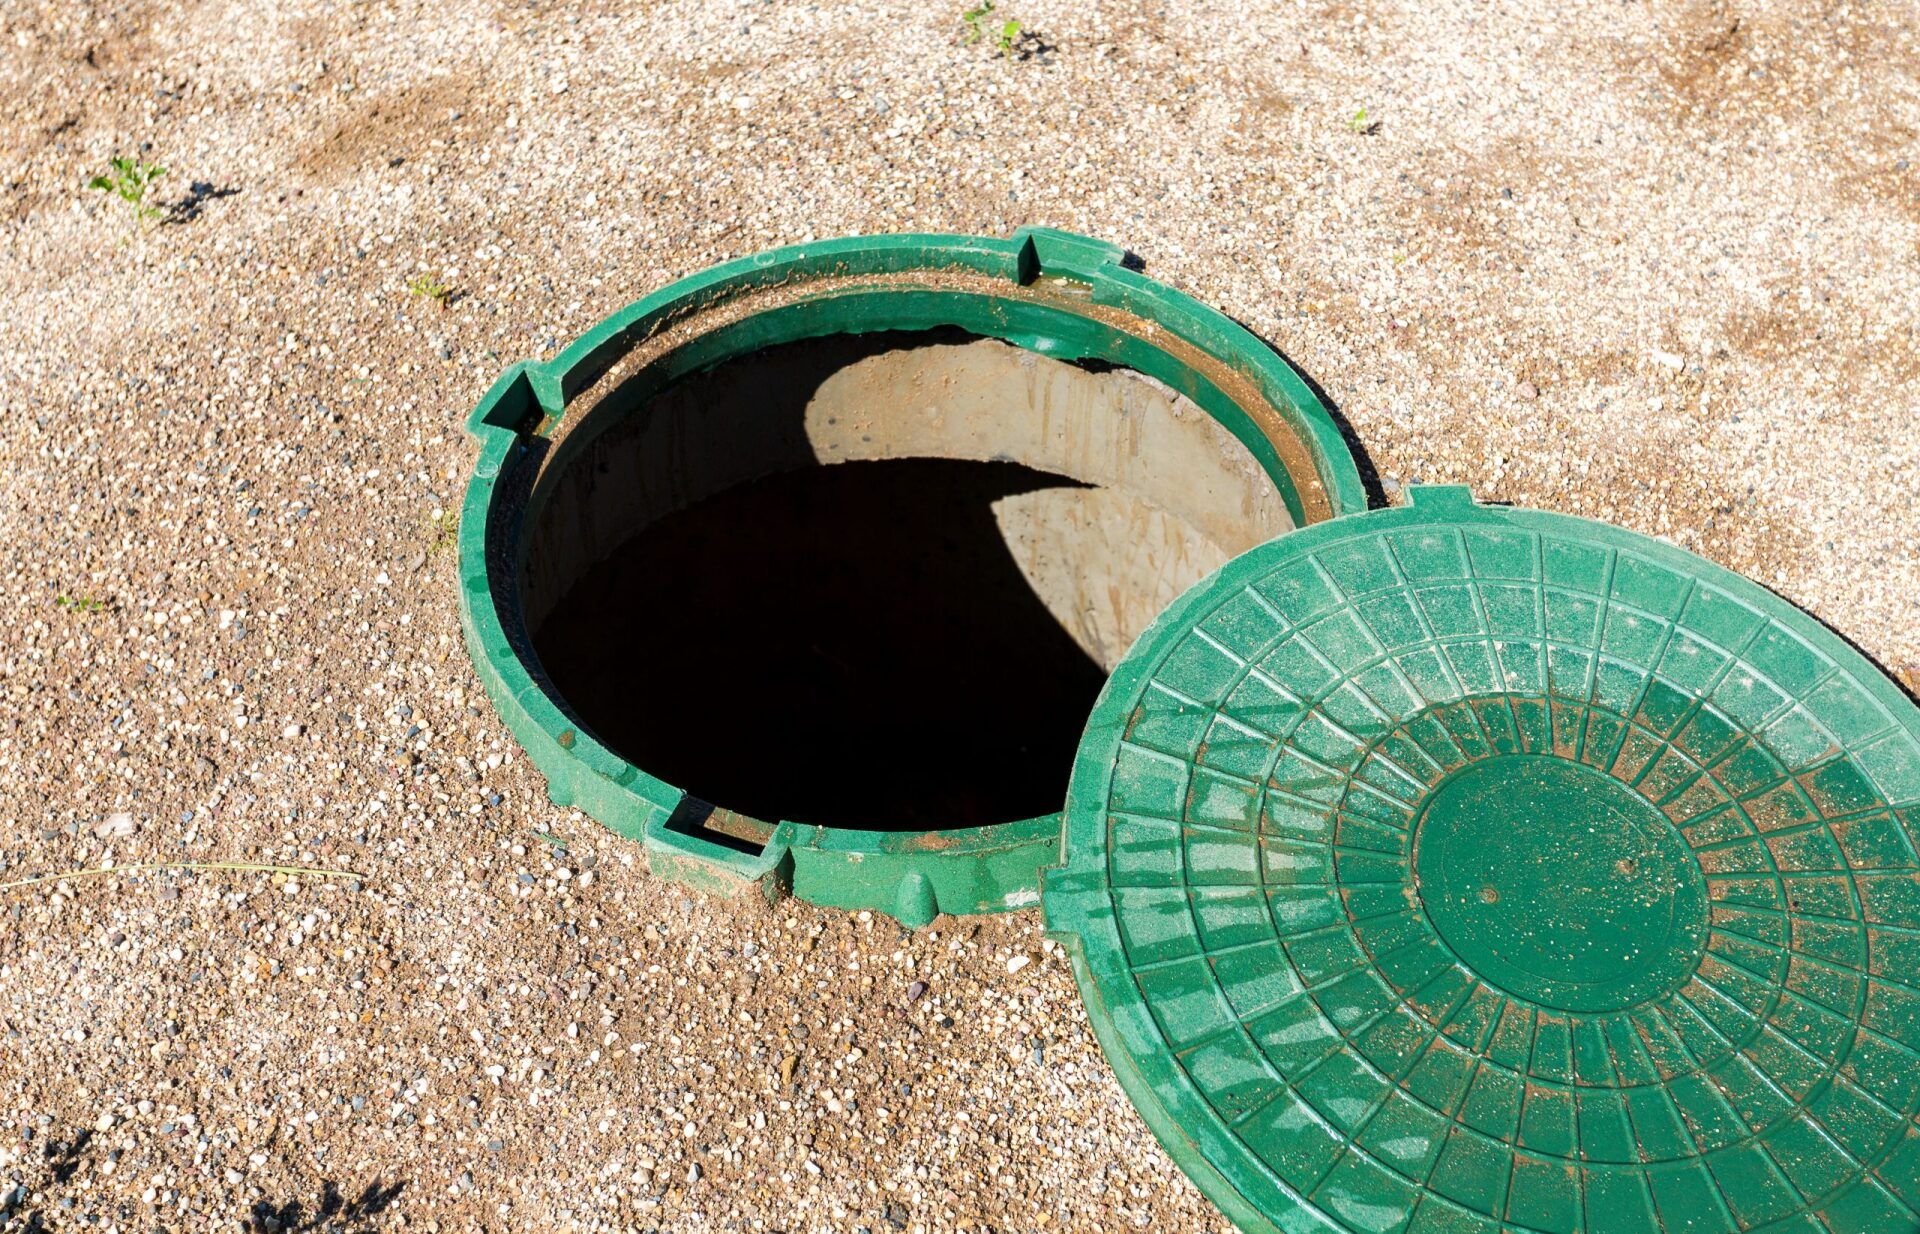 avoid-overfilling-septic-system-while-sheltering-scaled